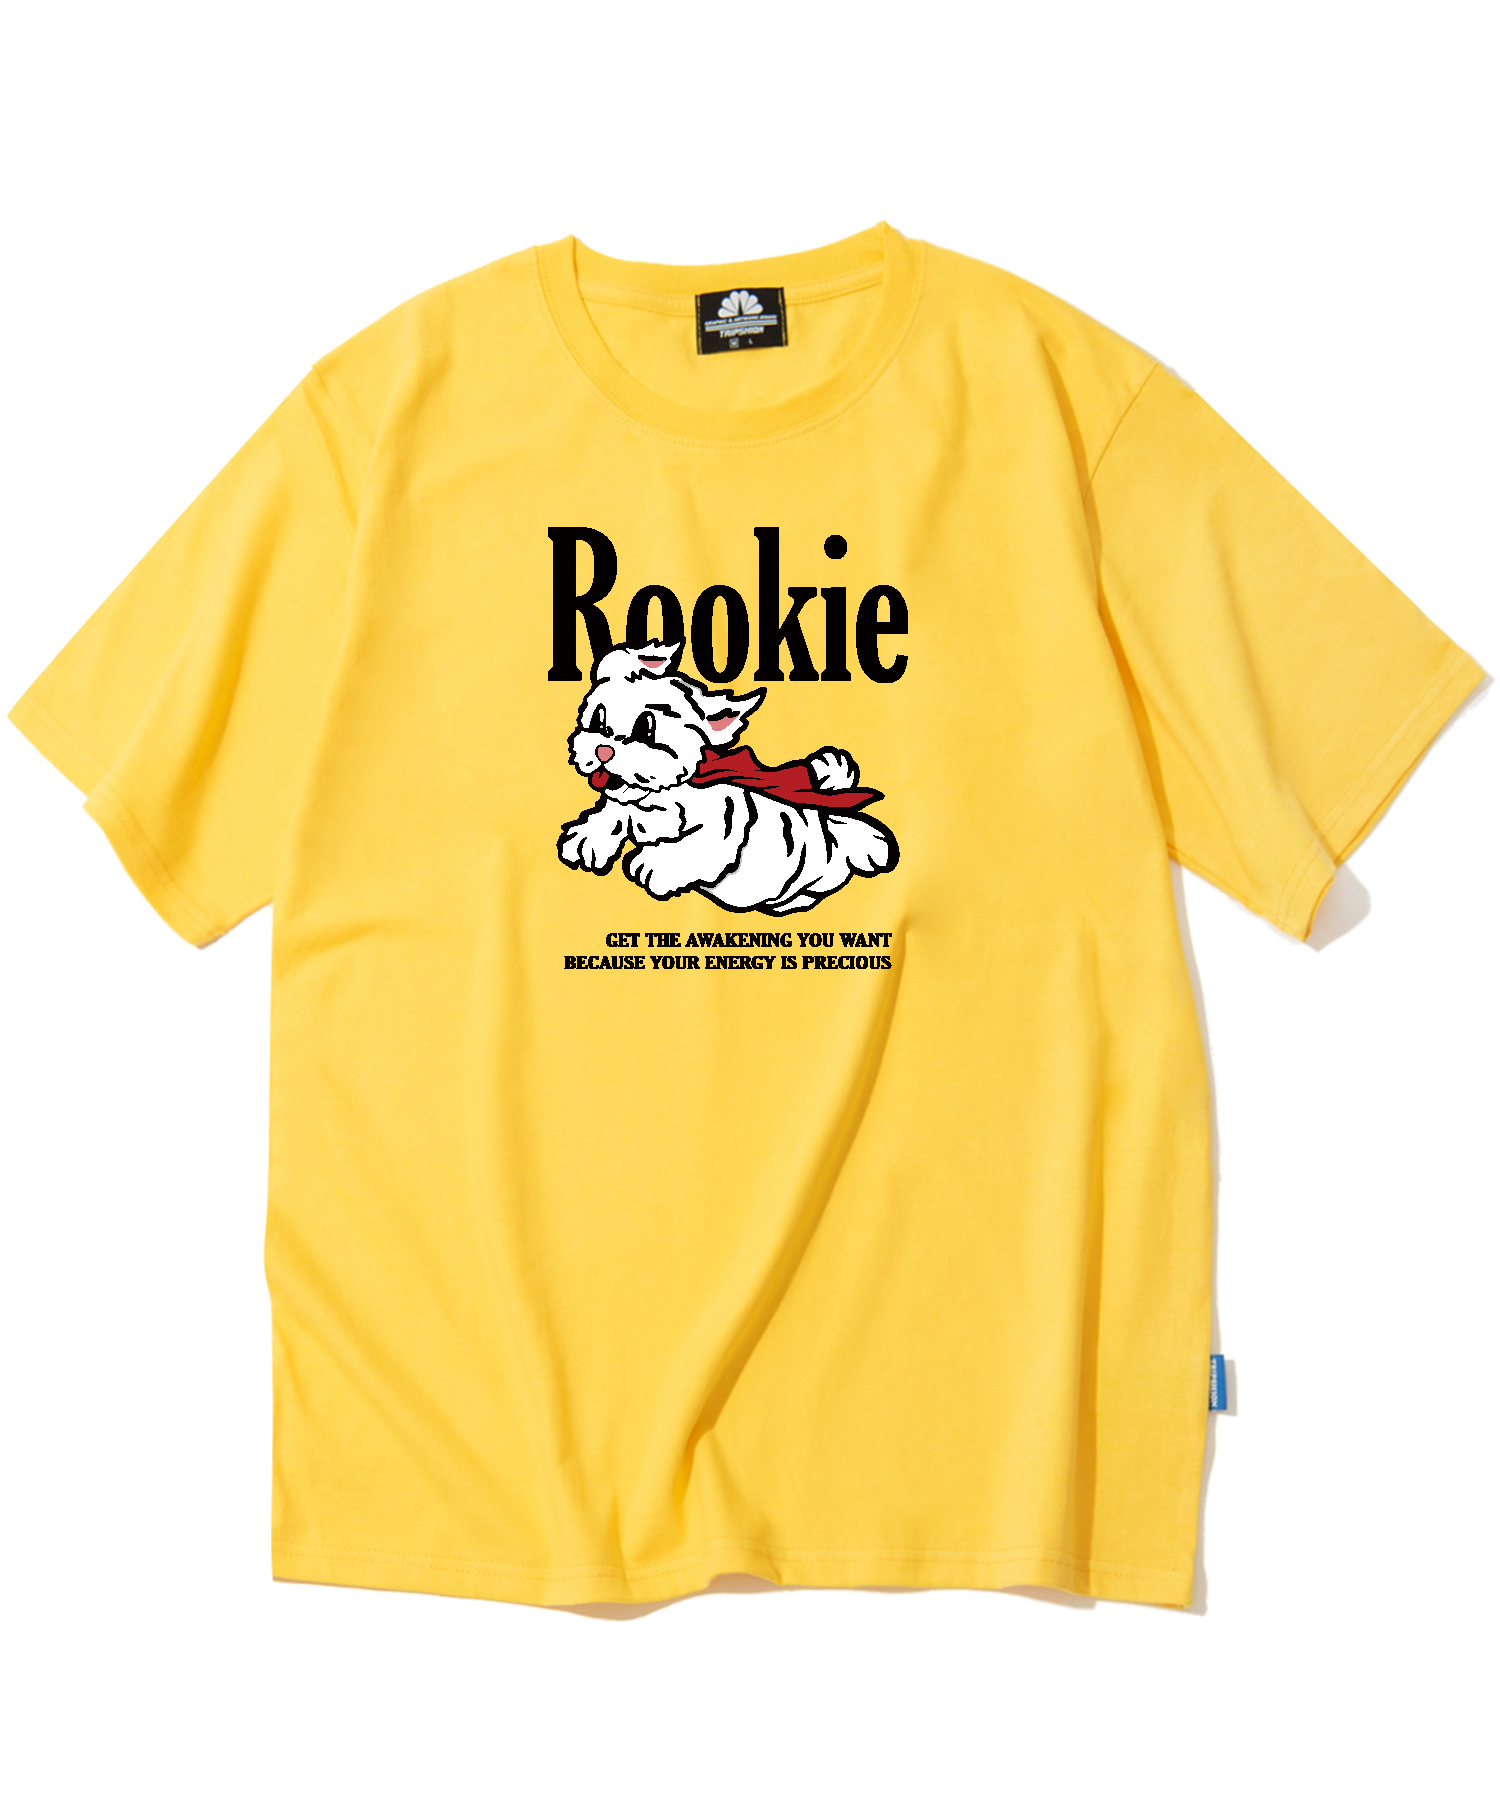 ROOKIE MALTESE GRAPHIC T-SHIRTS - YELLOW